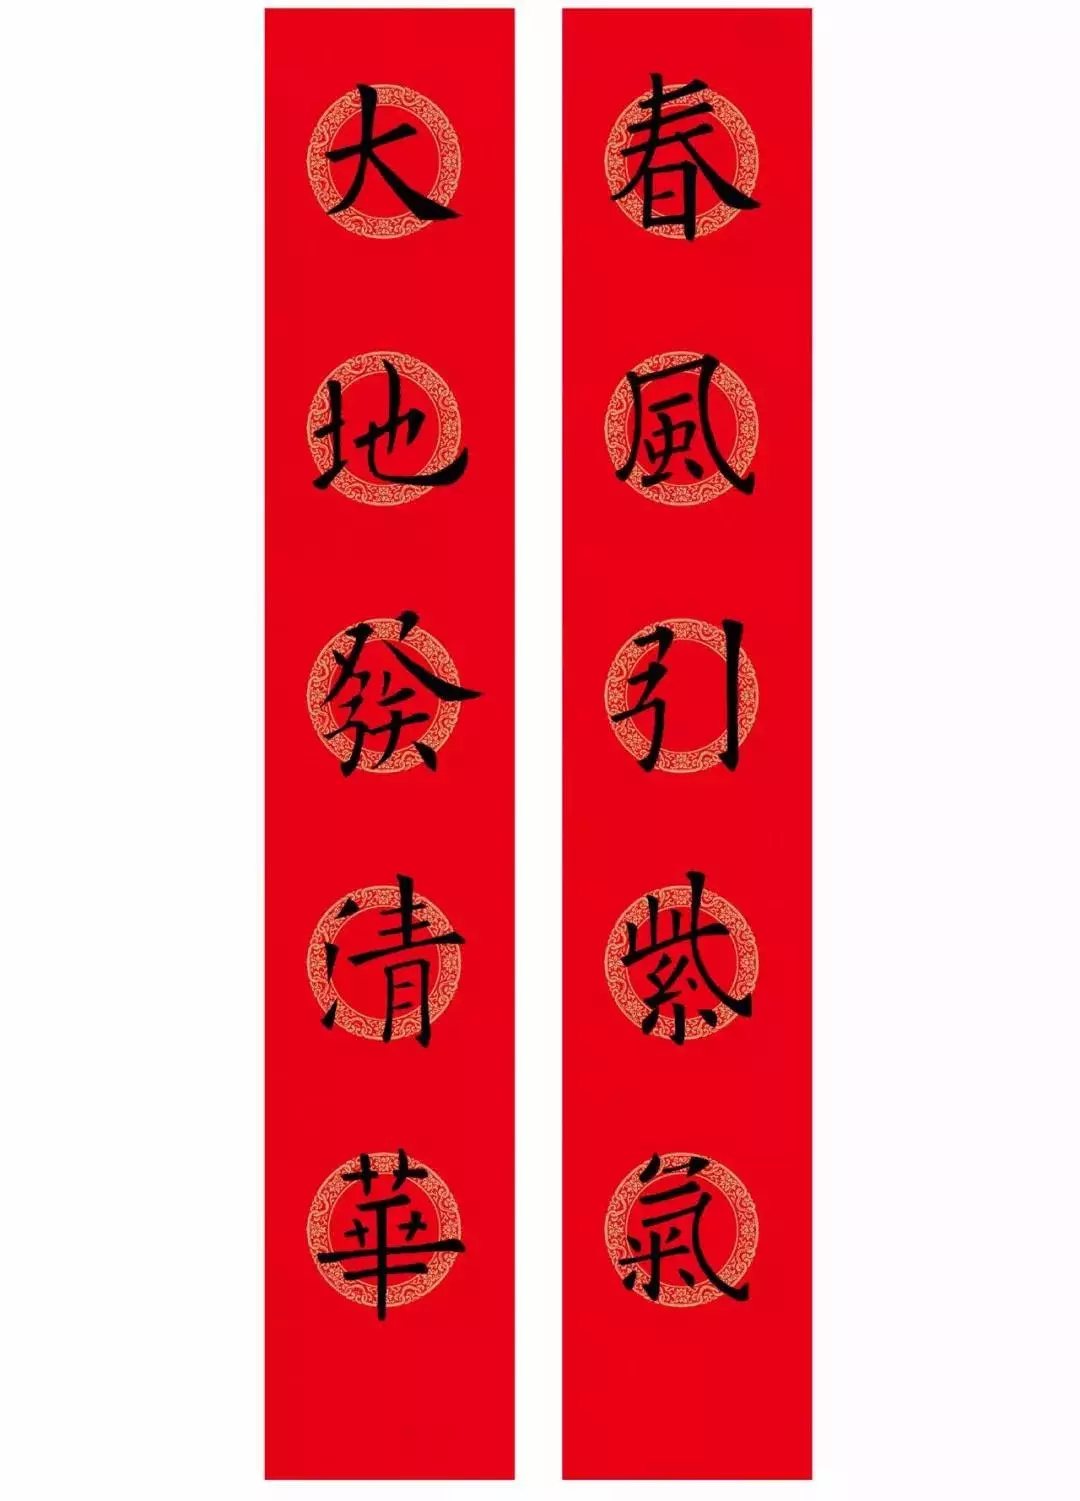 European style, Yan style, Wang Xizhi, Cao Quanbei collection of word spring couplets, worth collecting!